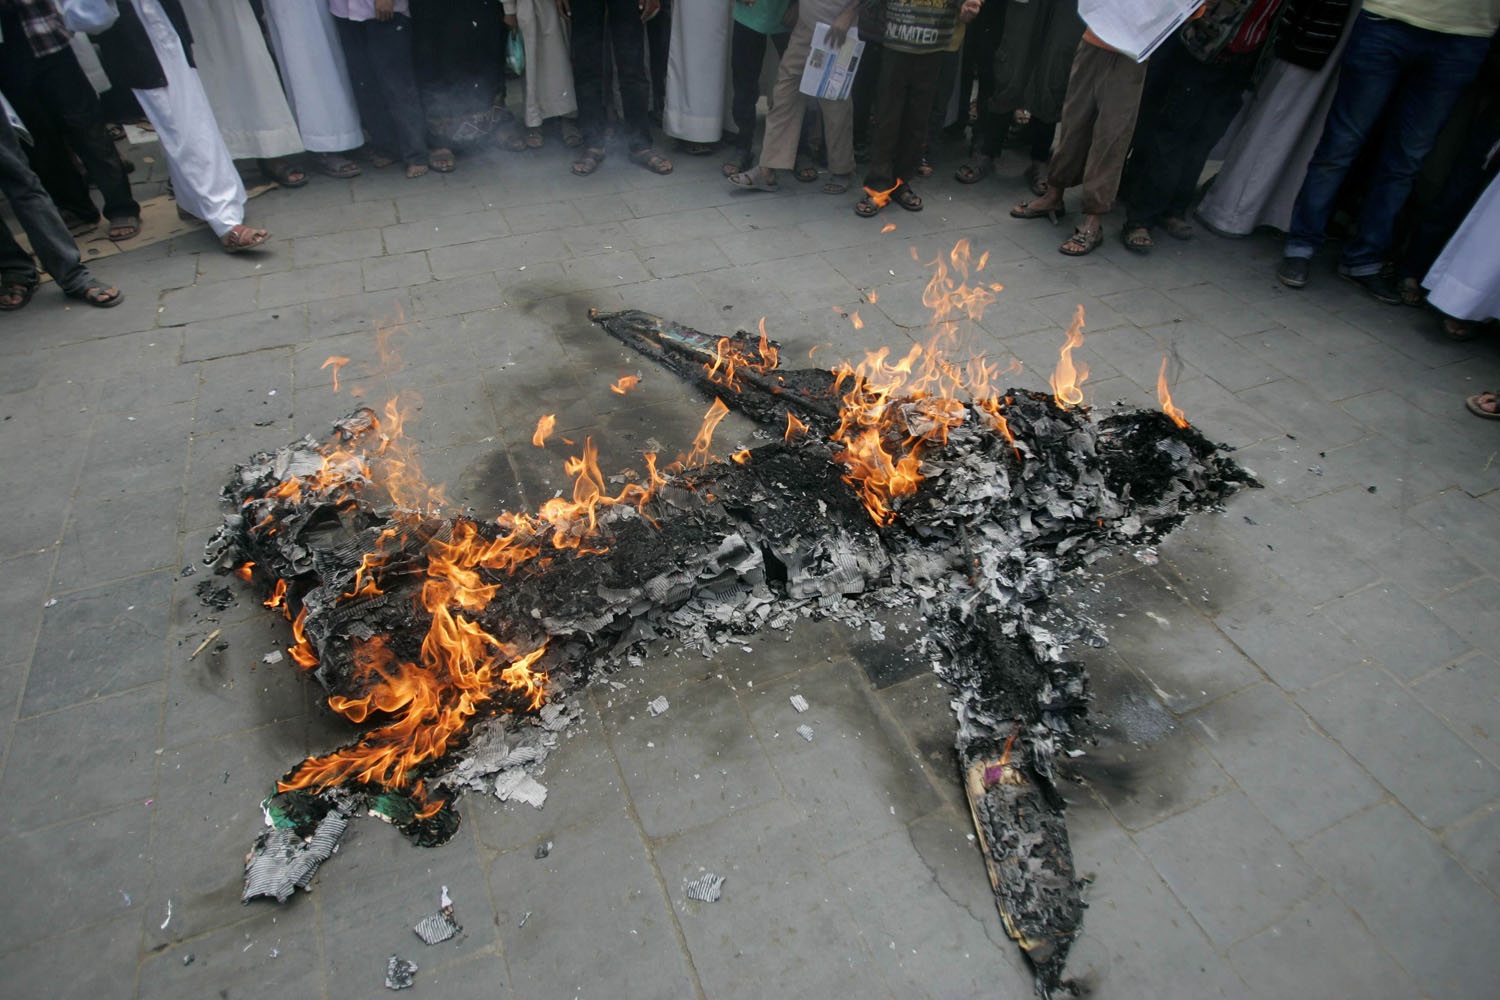 April 12, 2013. Protesters loyal to the Shi'ite al-Houthi rebel group burn an effigy of a U.S. aircraft during a demonstration to protest against what they say is U.S. interference in Yemen, including drone strikes, after their weekly Friday prayers in the Old City of Sana'a.